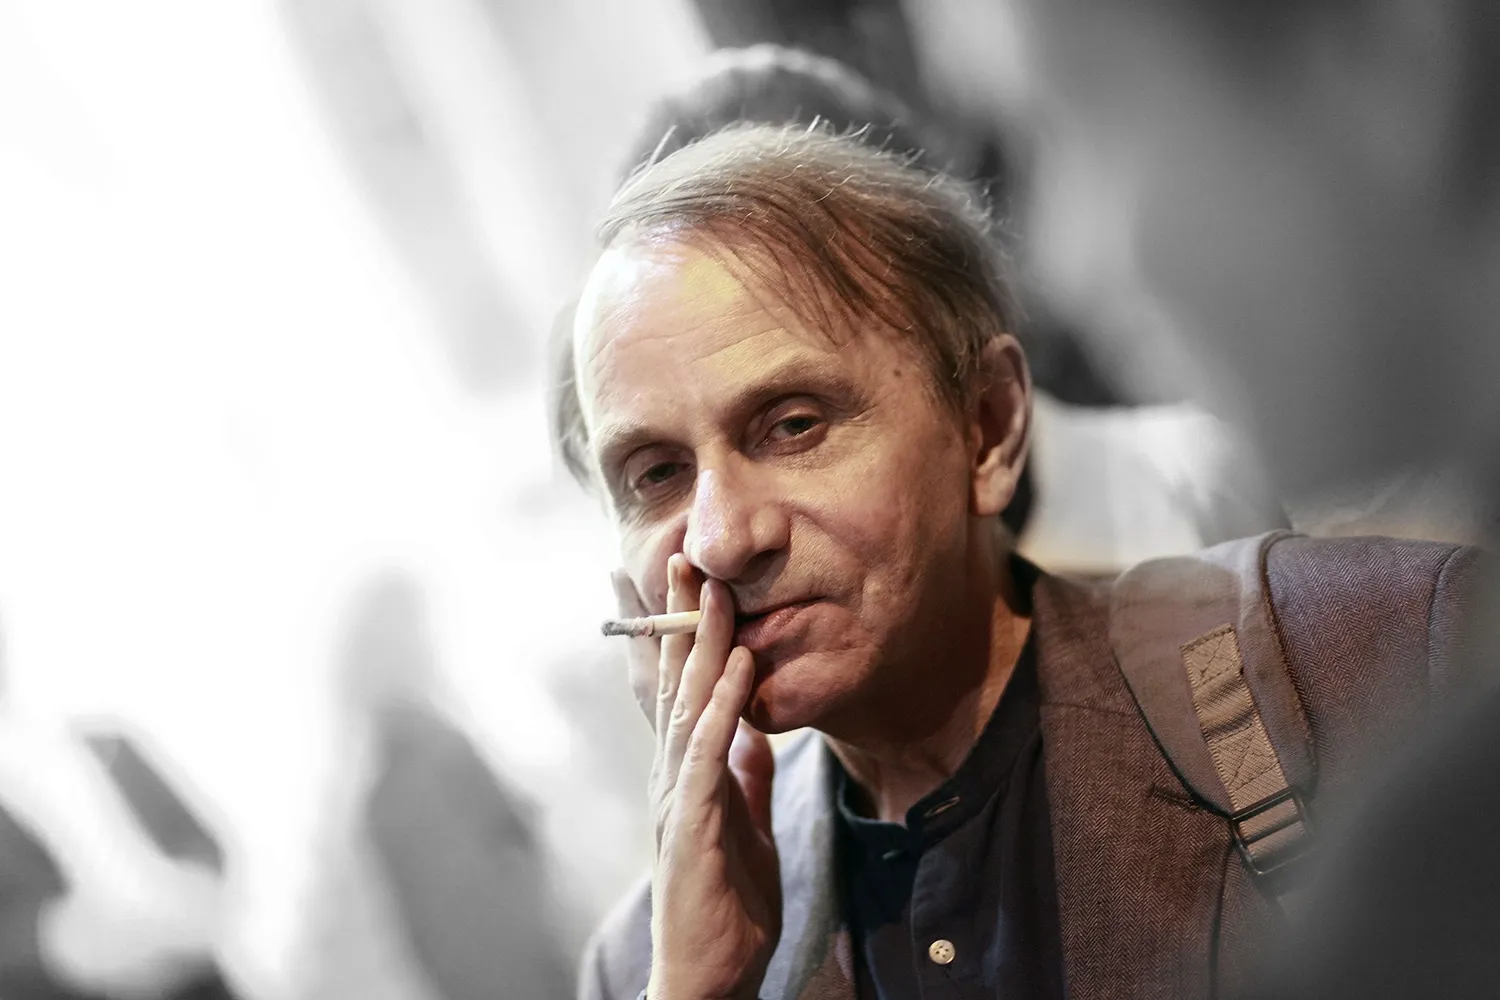 Houellebecq's New Memoir and the Recent Riots in France: Quillette Cetera Episode 10